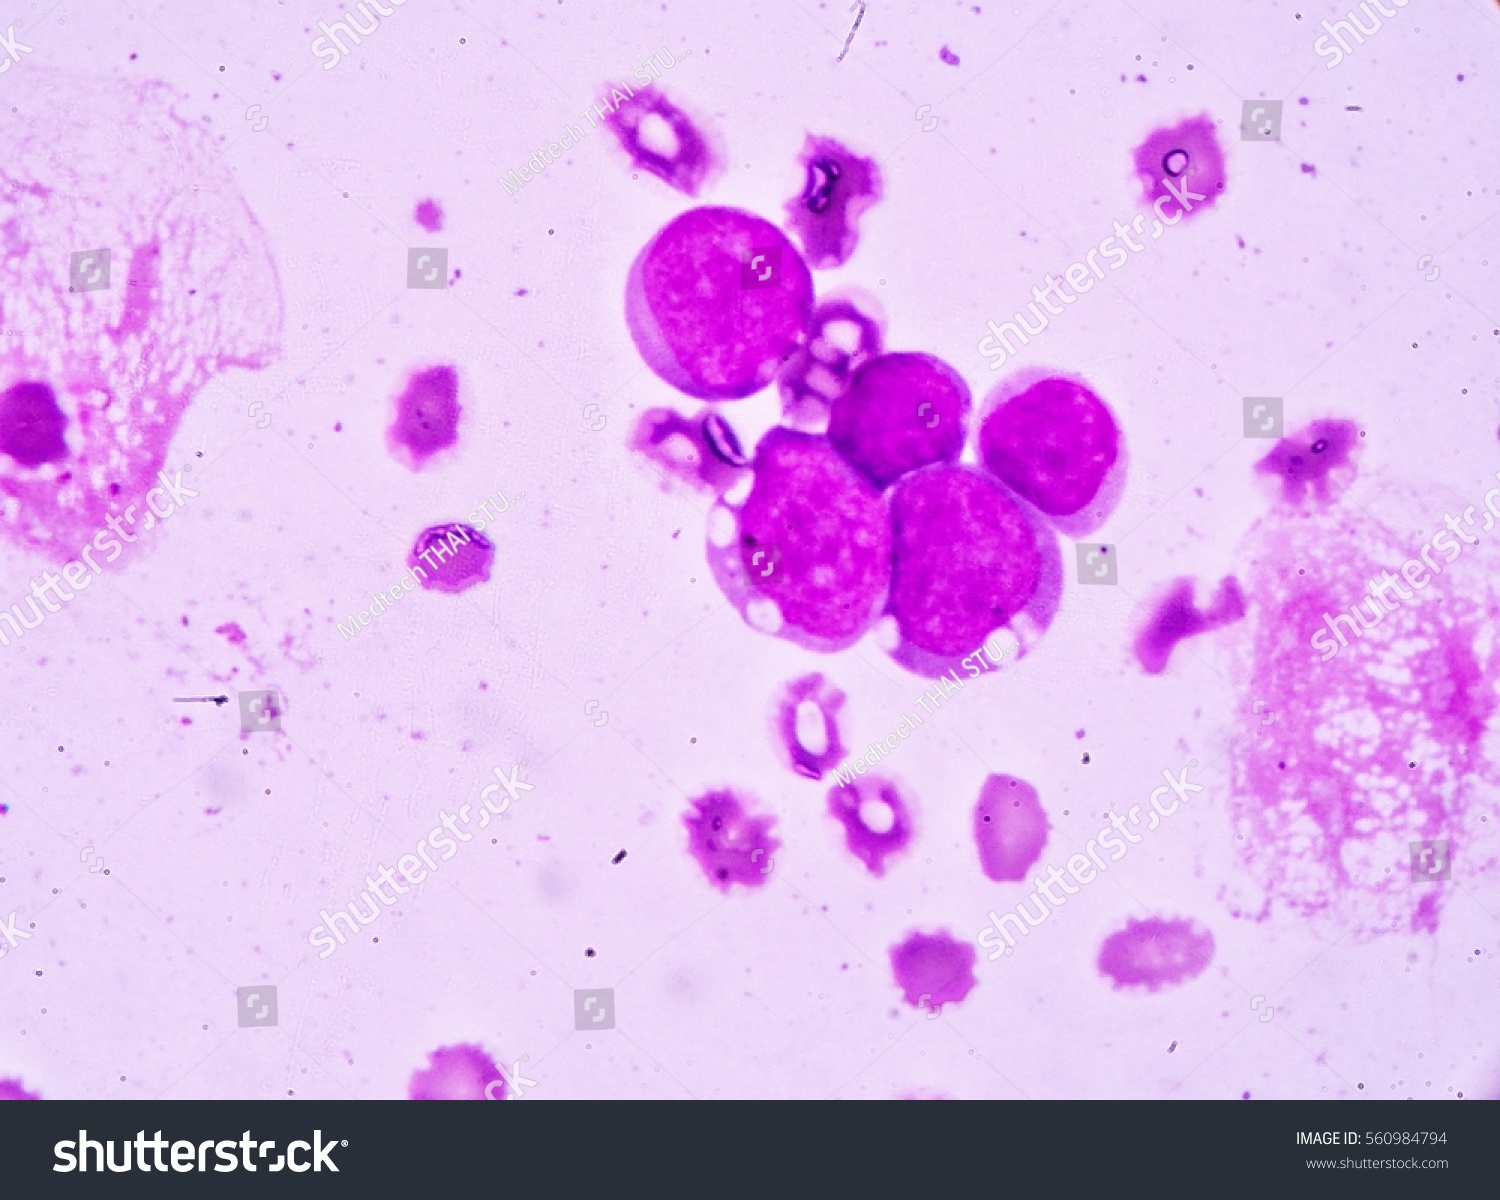 Blood Smear Under Microscopy Showing On Stock Photo (Edit Now) 560984794